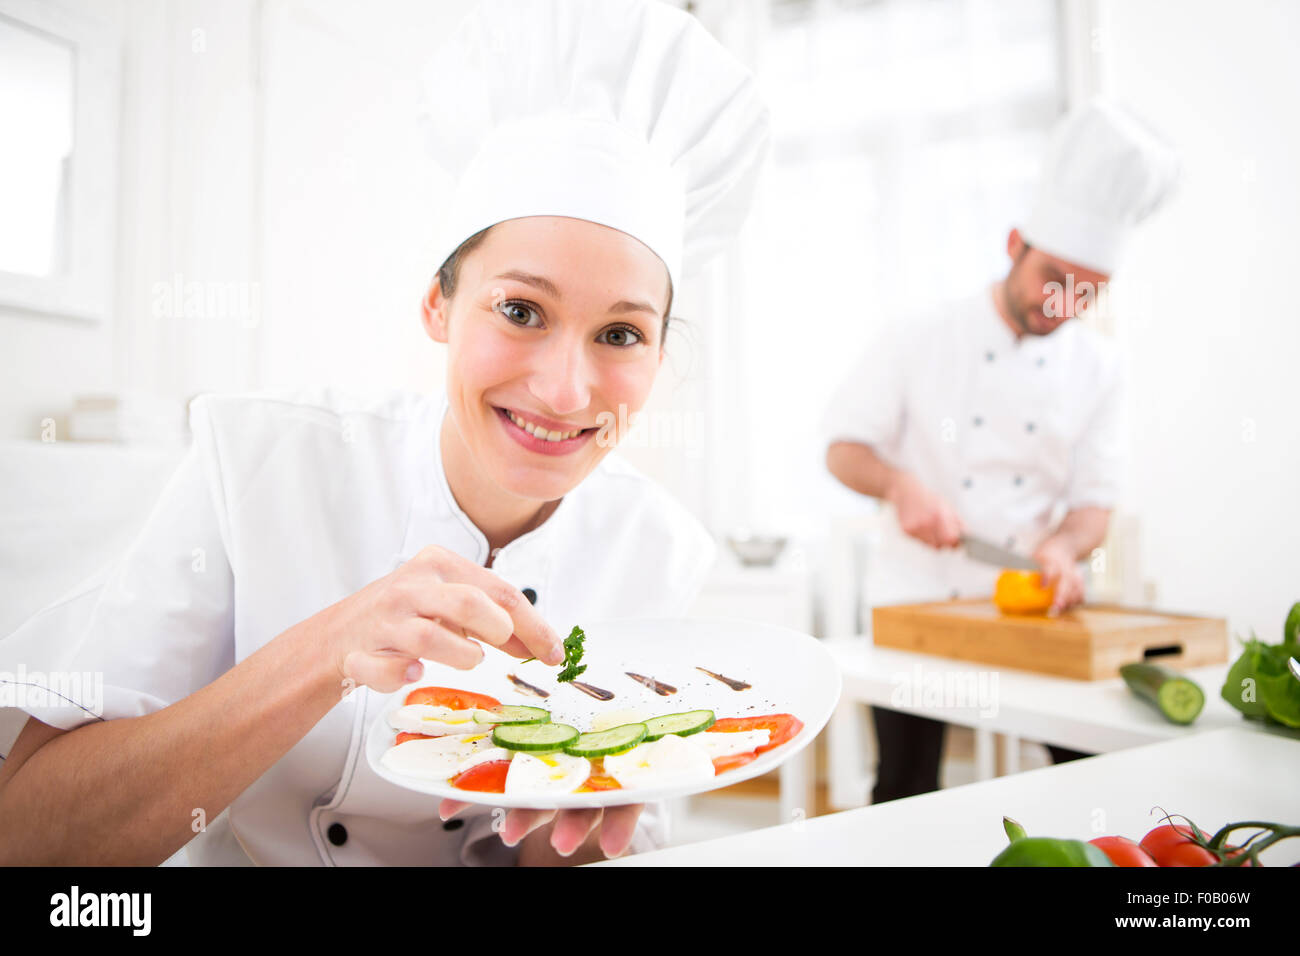 View of a Young attractive professional chef cooking in his kitchen Stock Photo